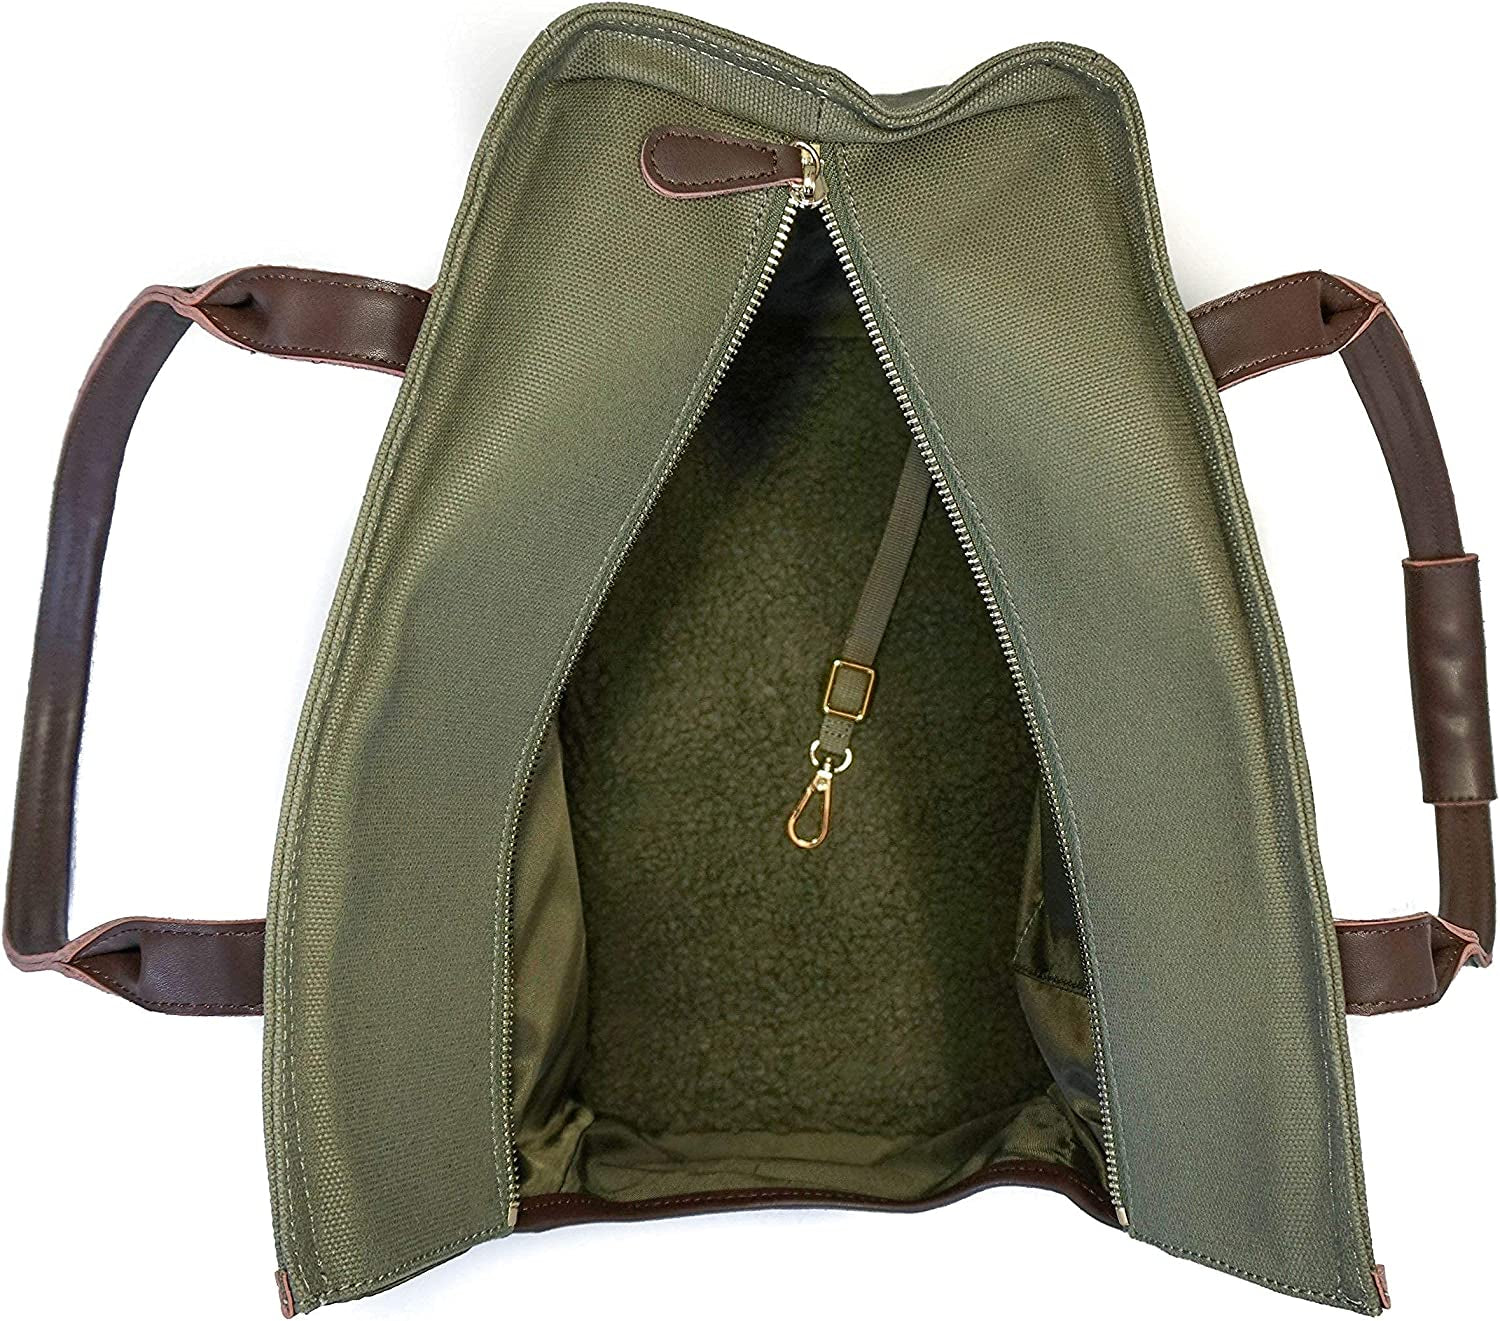 DJANGO Dog Carrier Bag - Waxed Canvas and Leather Soft-Sided Pet Travel  Tote with Bag-to-Harness Safety Tether & Secure Zipper Pockets (Medium,  Olive